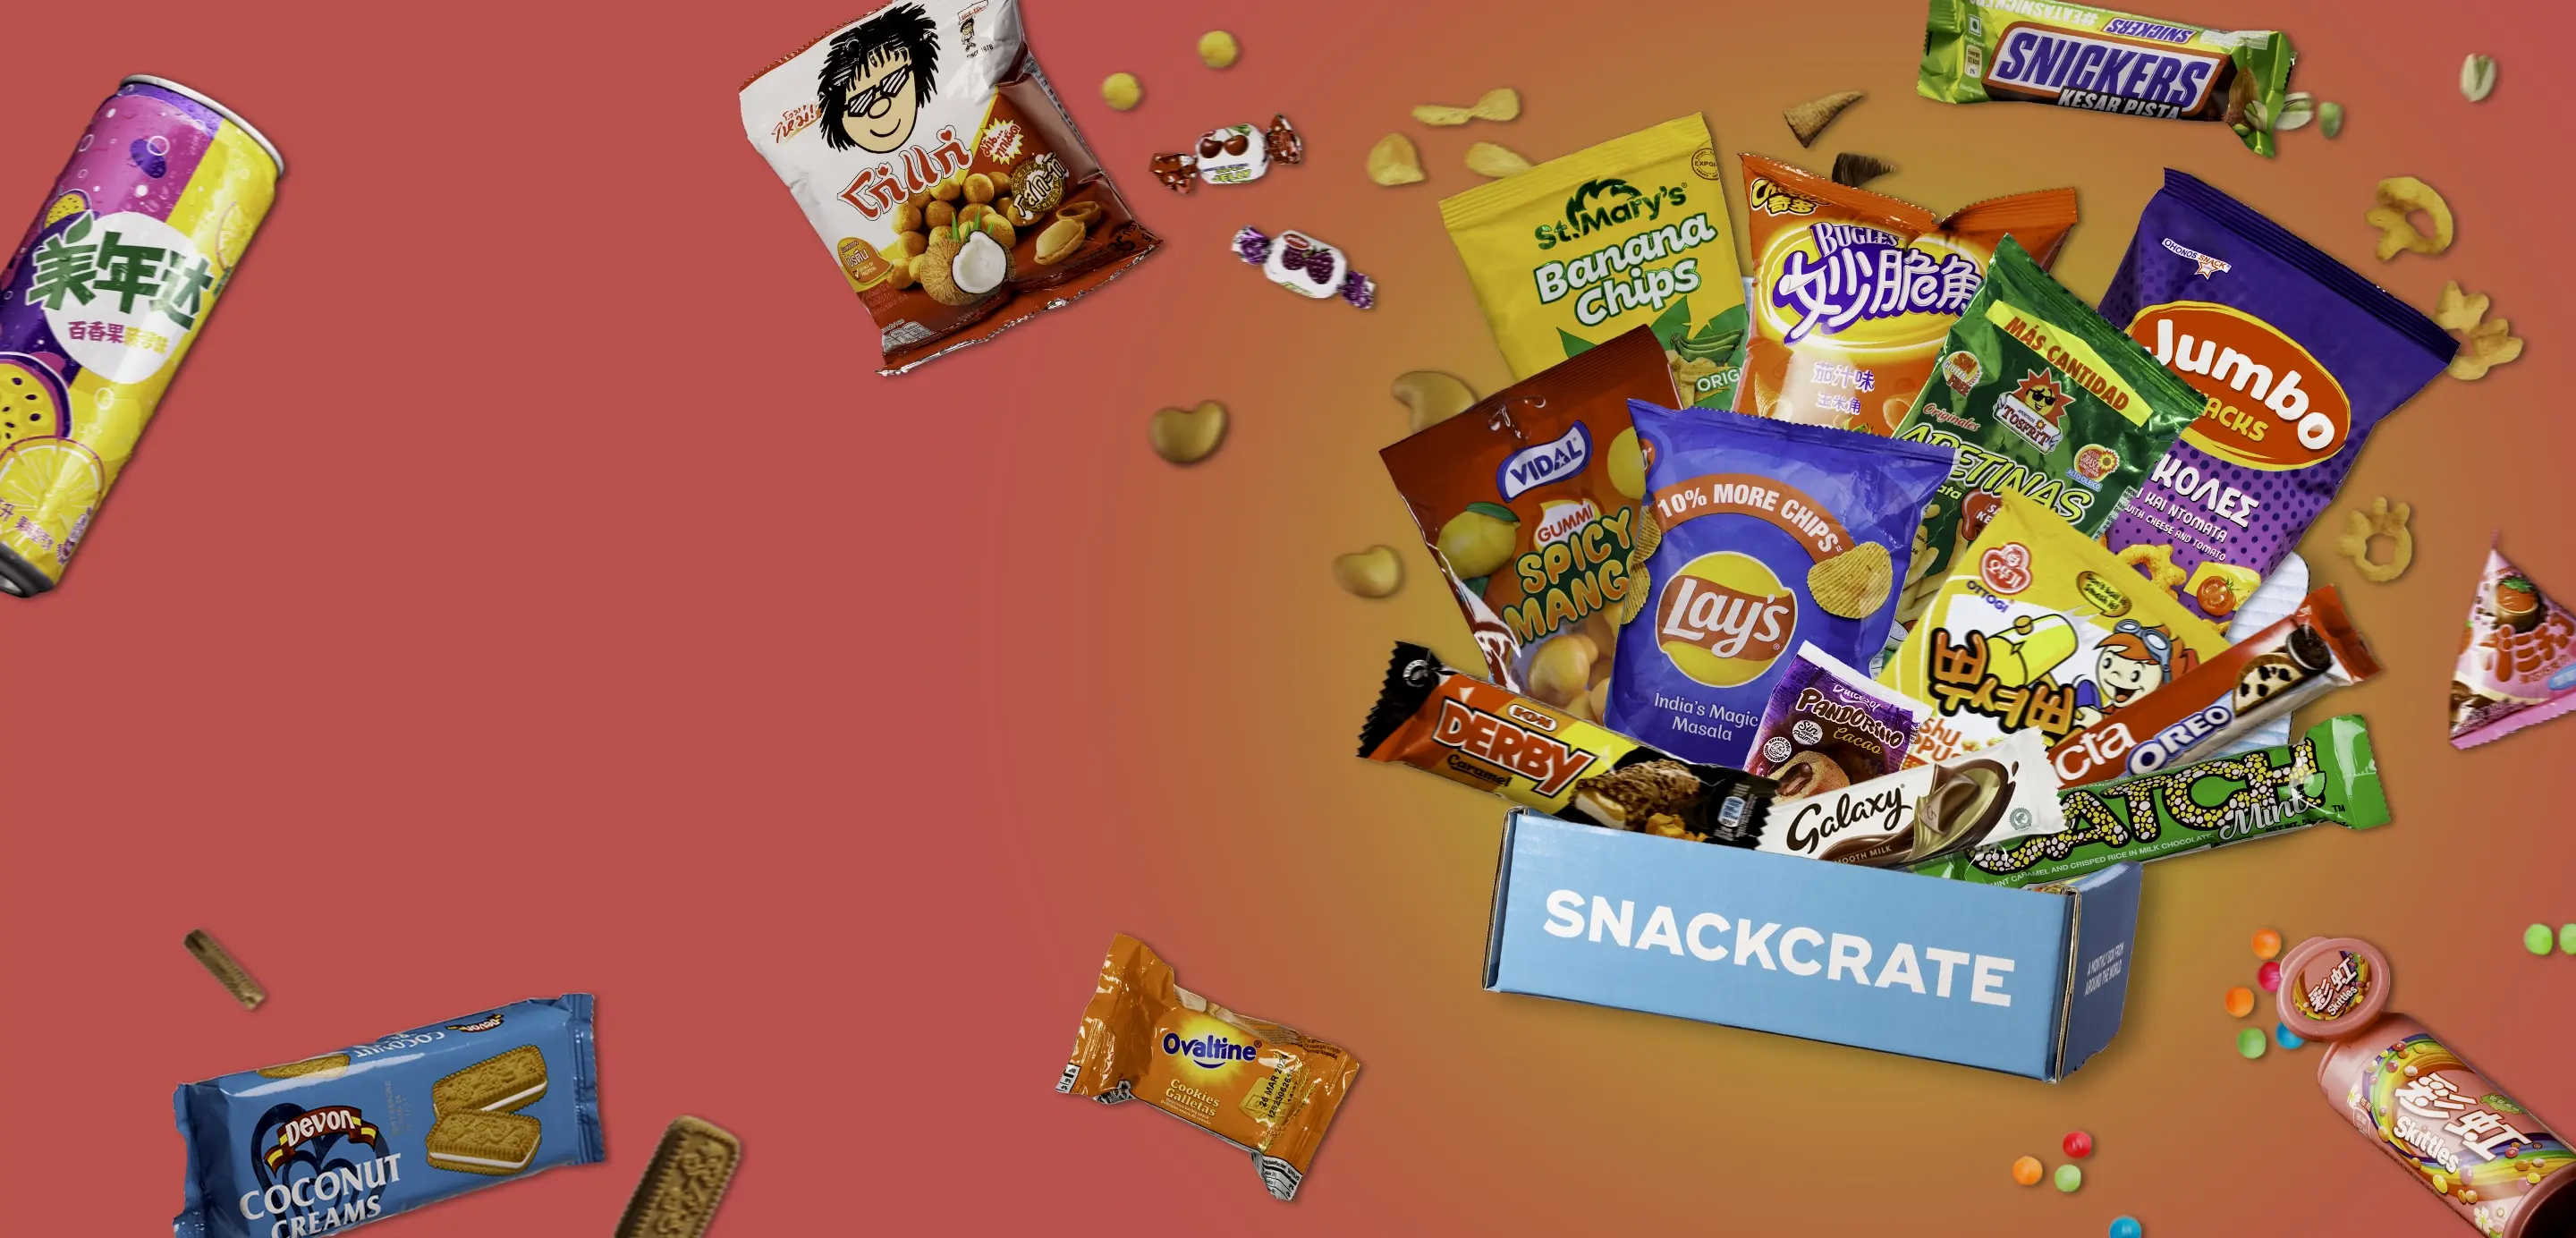 An open China SnackCrate overflowing with snacks on a red background.